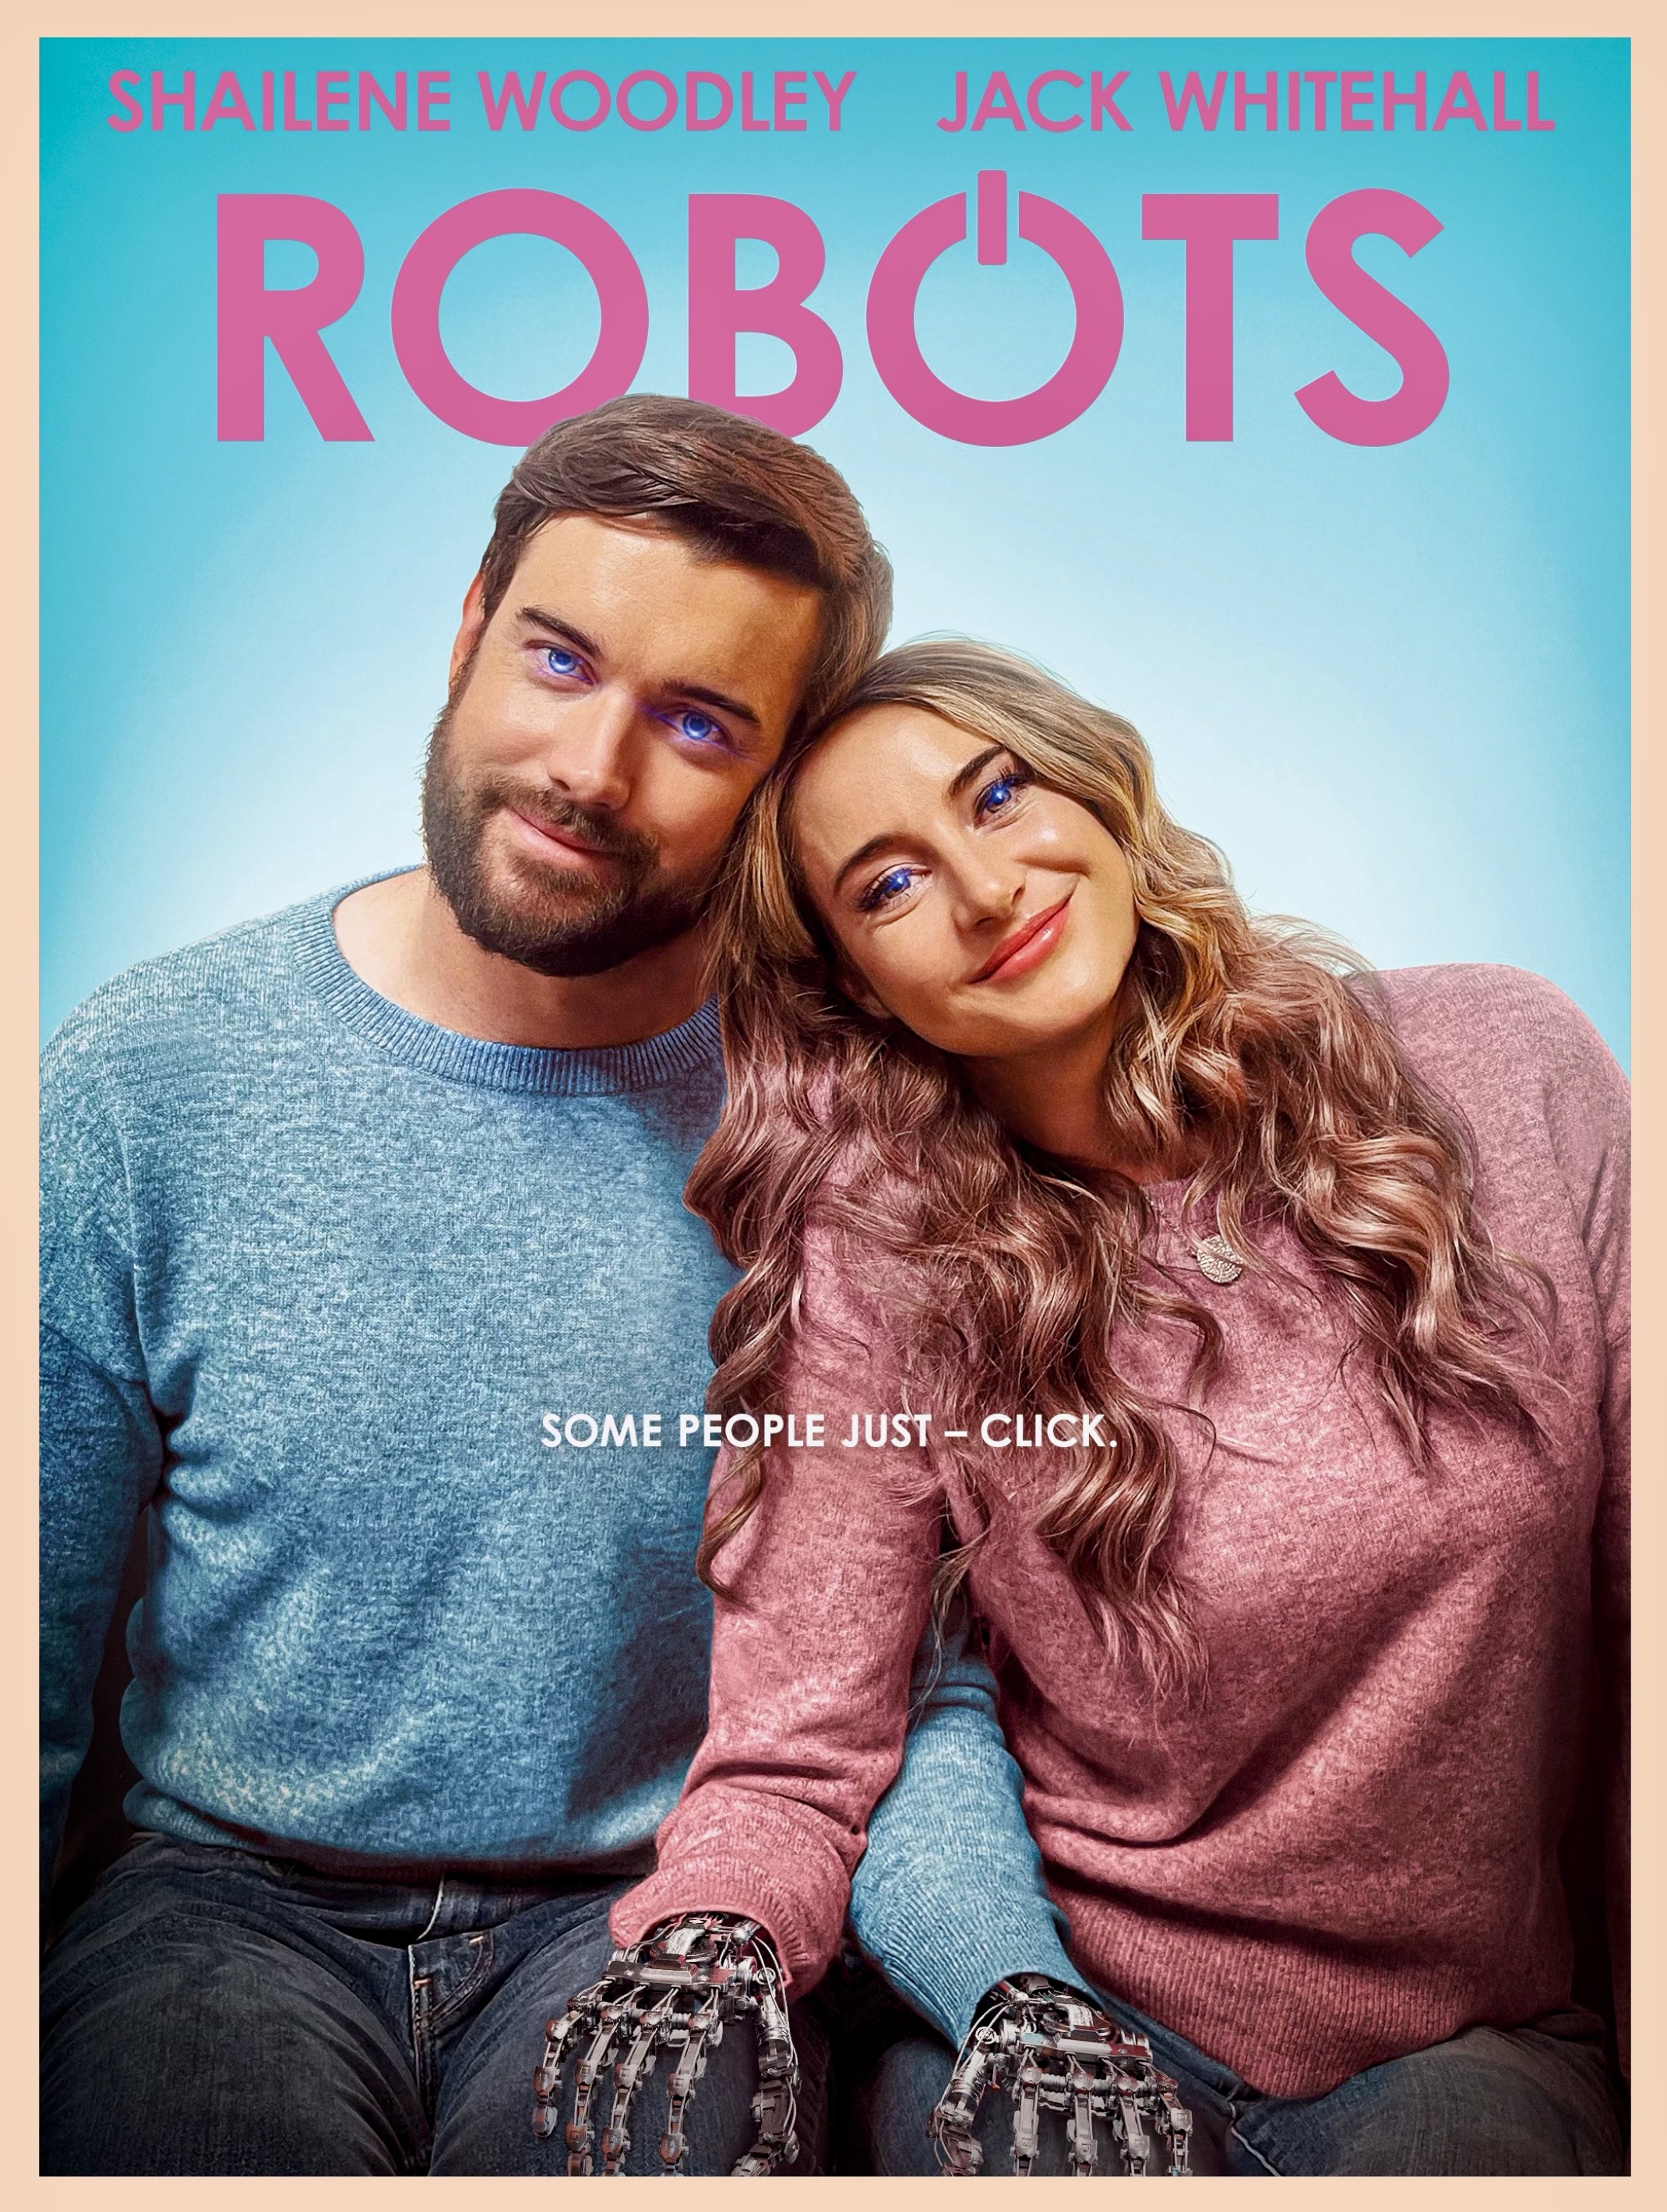 Check Out The Trailer For Shailene Woodley’s New Comedy, Robots